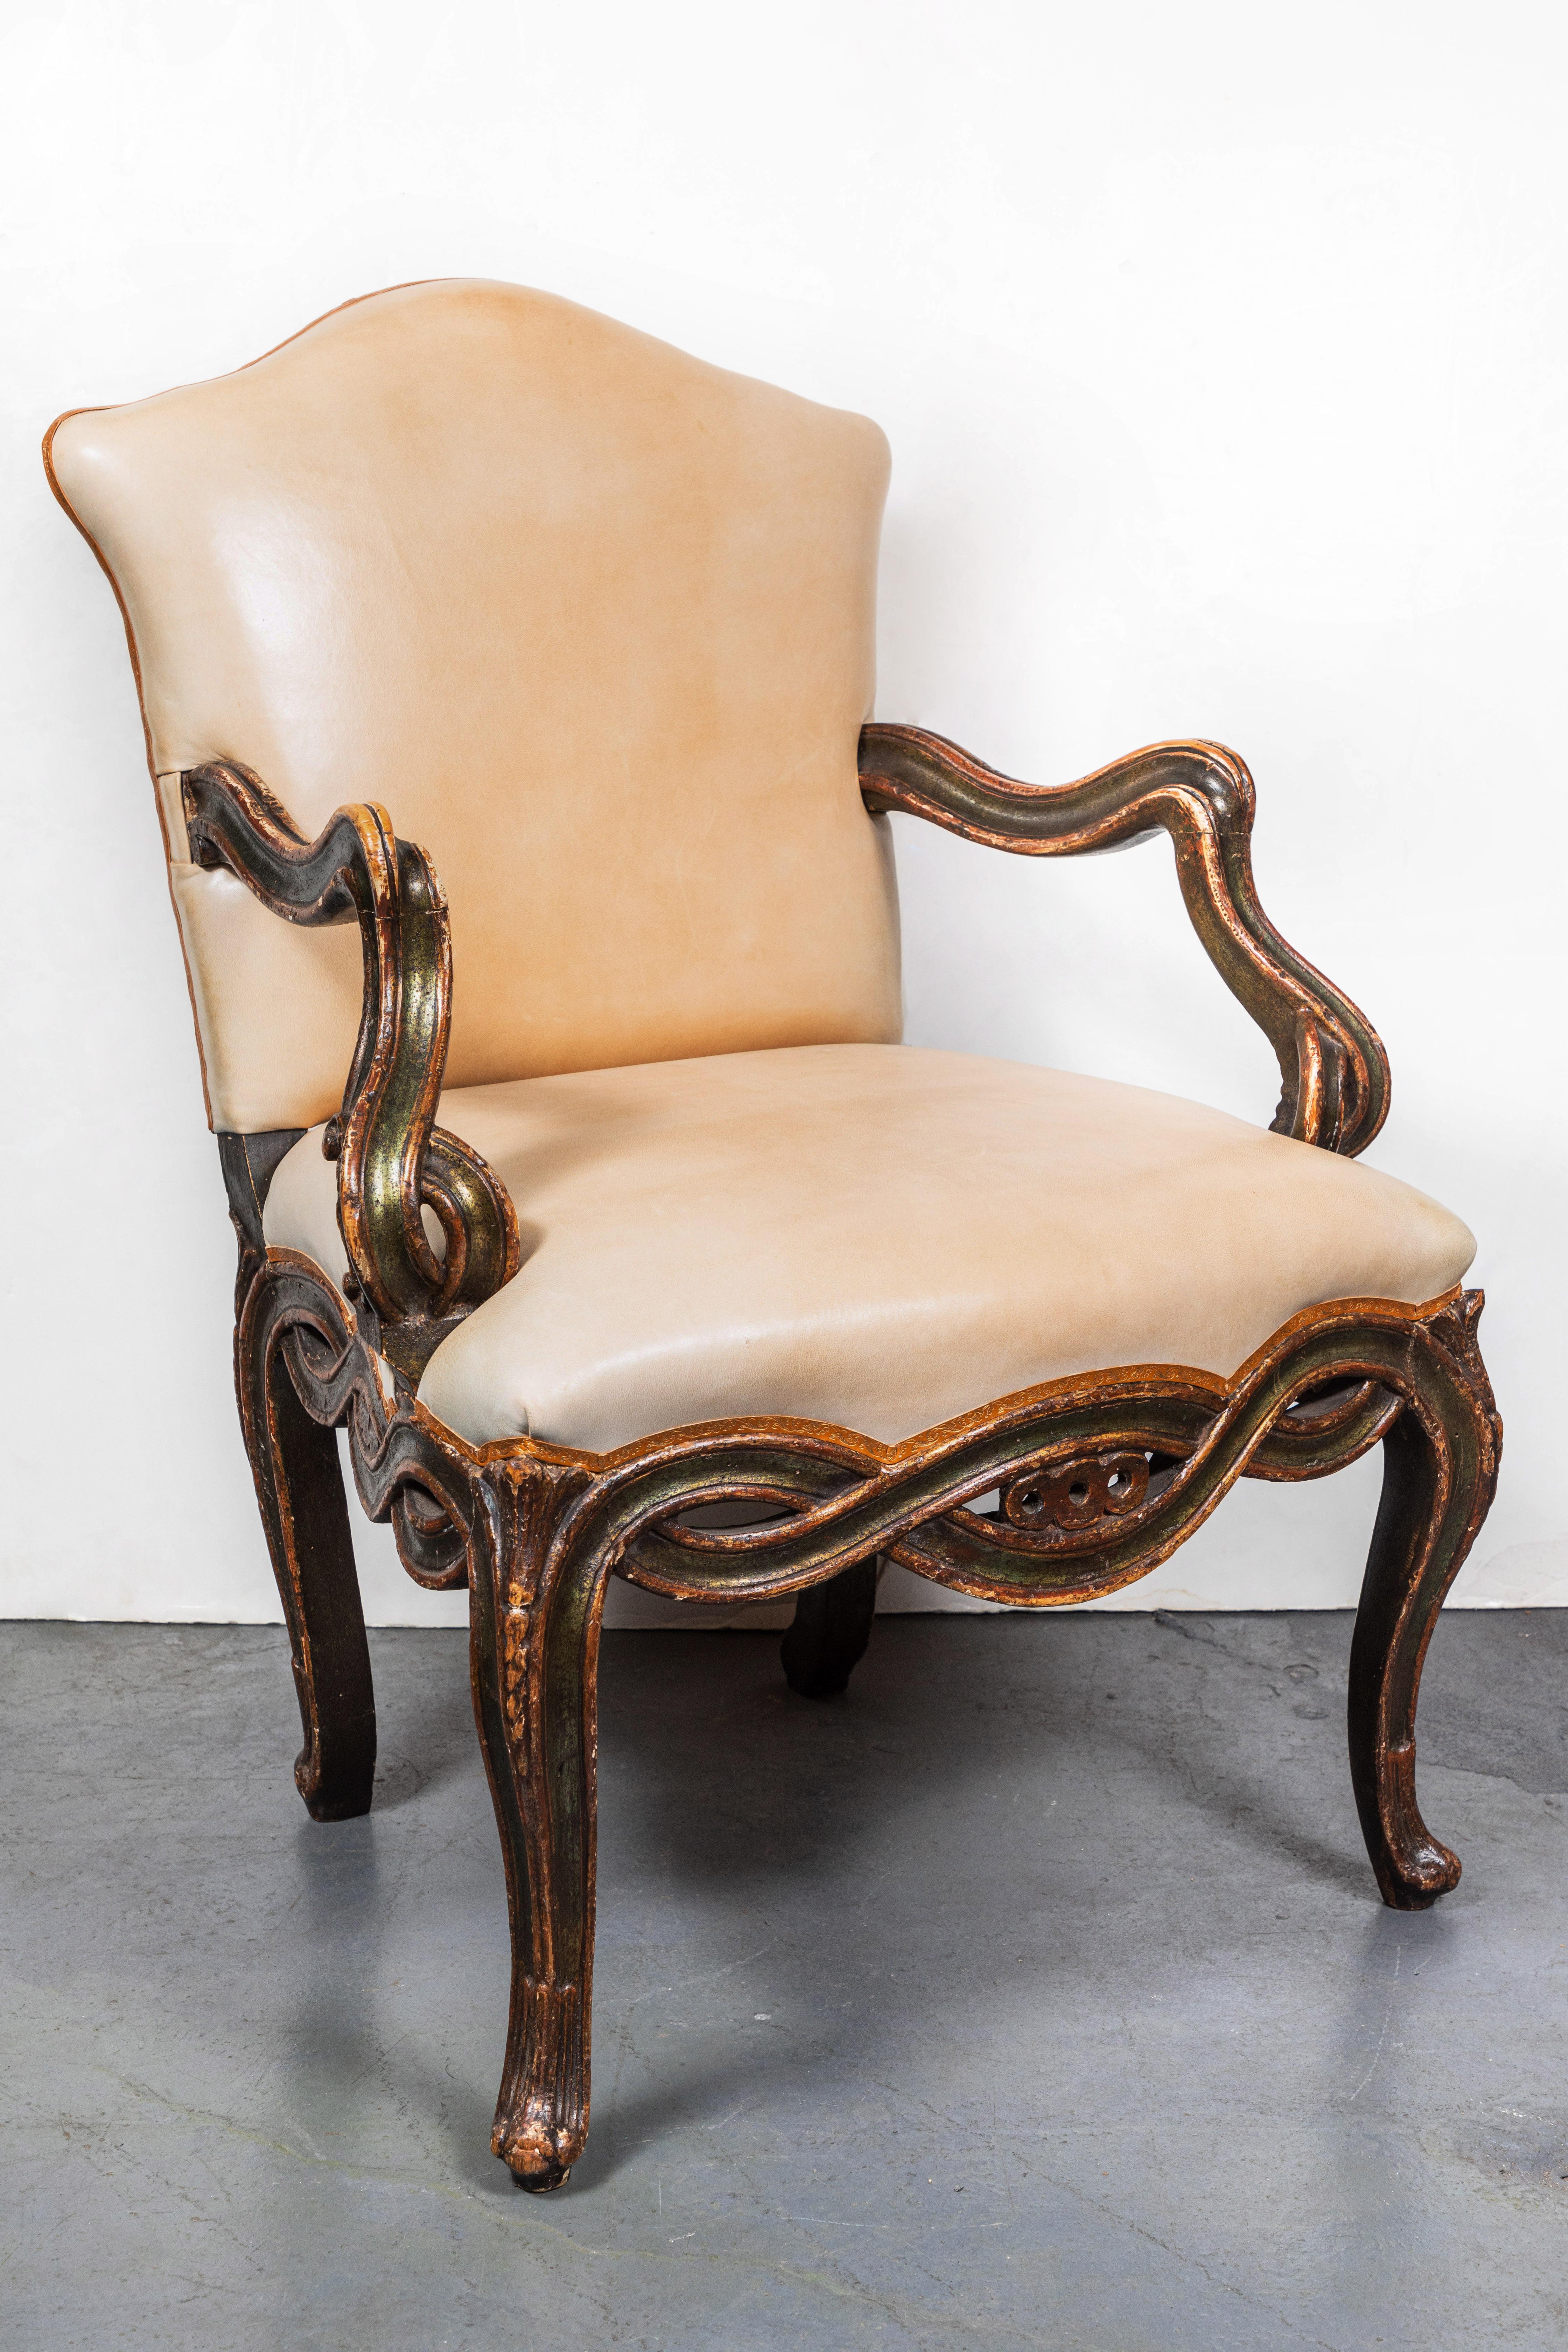 A remarkable set of four, petite, 19th century, hand carved and painted, parcel-gilt, Venetian armchairs with remarkable, pierced, serpentine woodwork. Throughout. Sold as two sets of two, or as an entire ensemble.